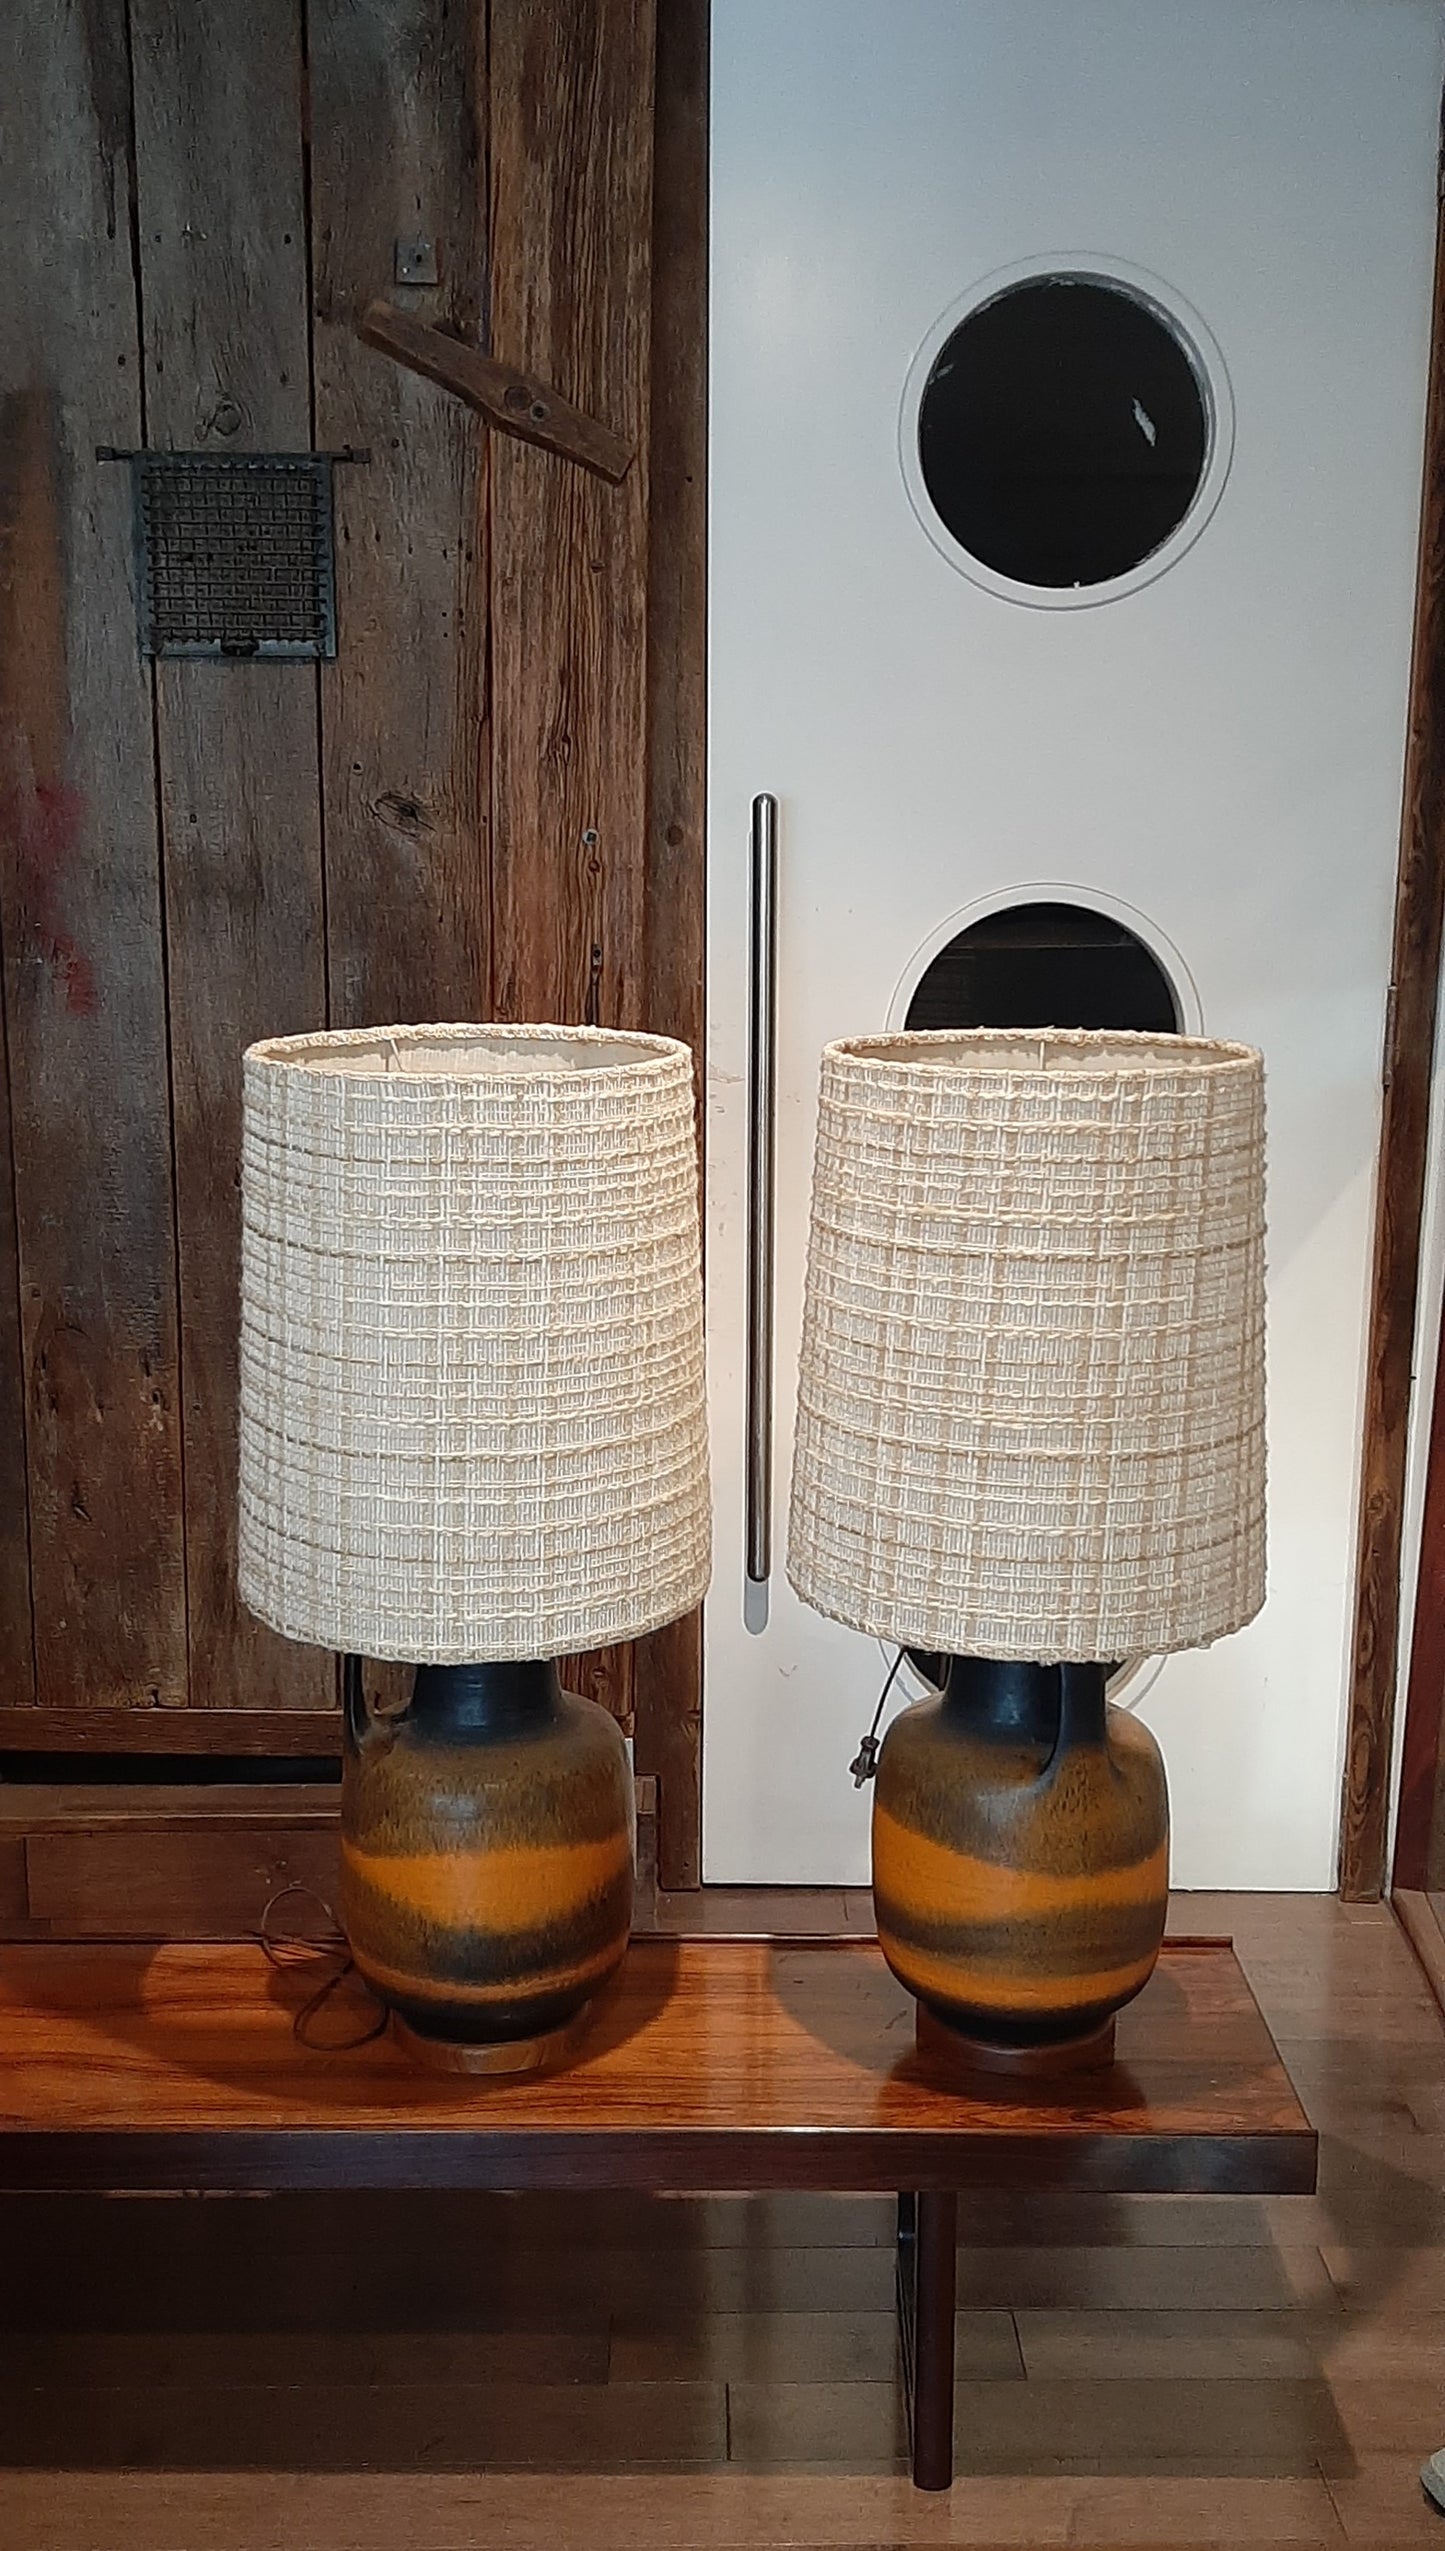 Set of 2 Large Mid Century Modern Orange Pottery Lamps, H 34" (including shades)